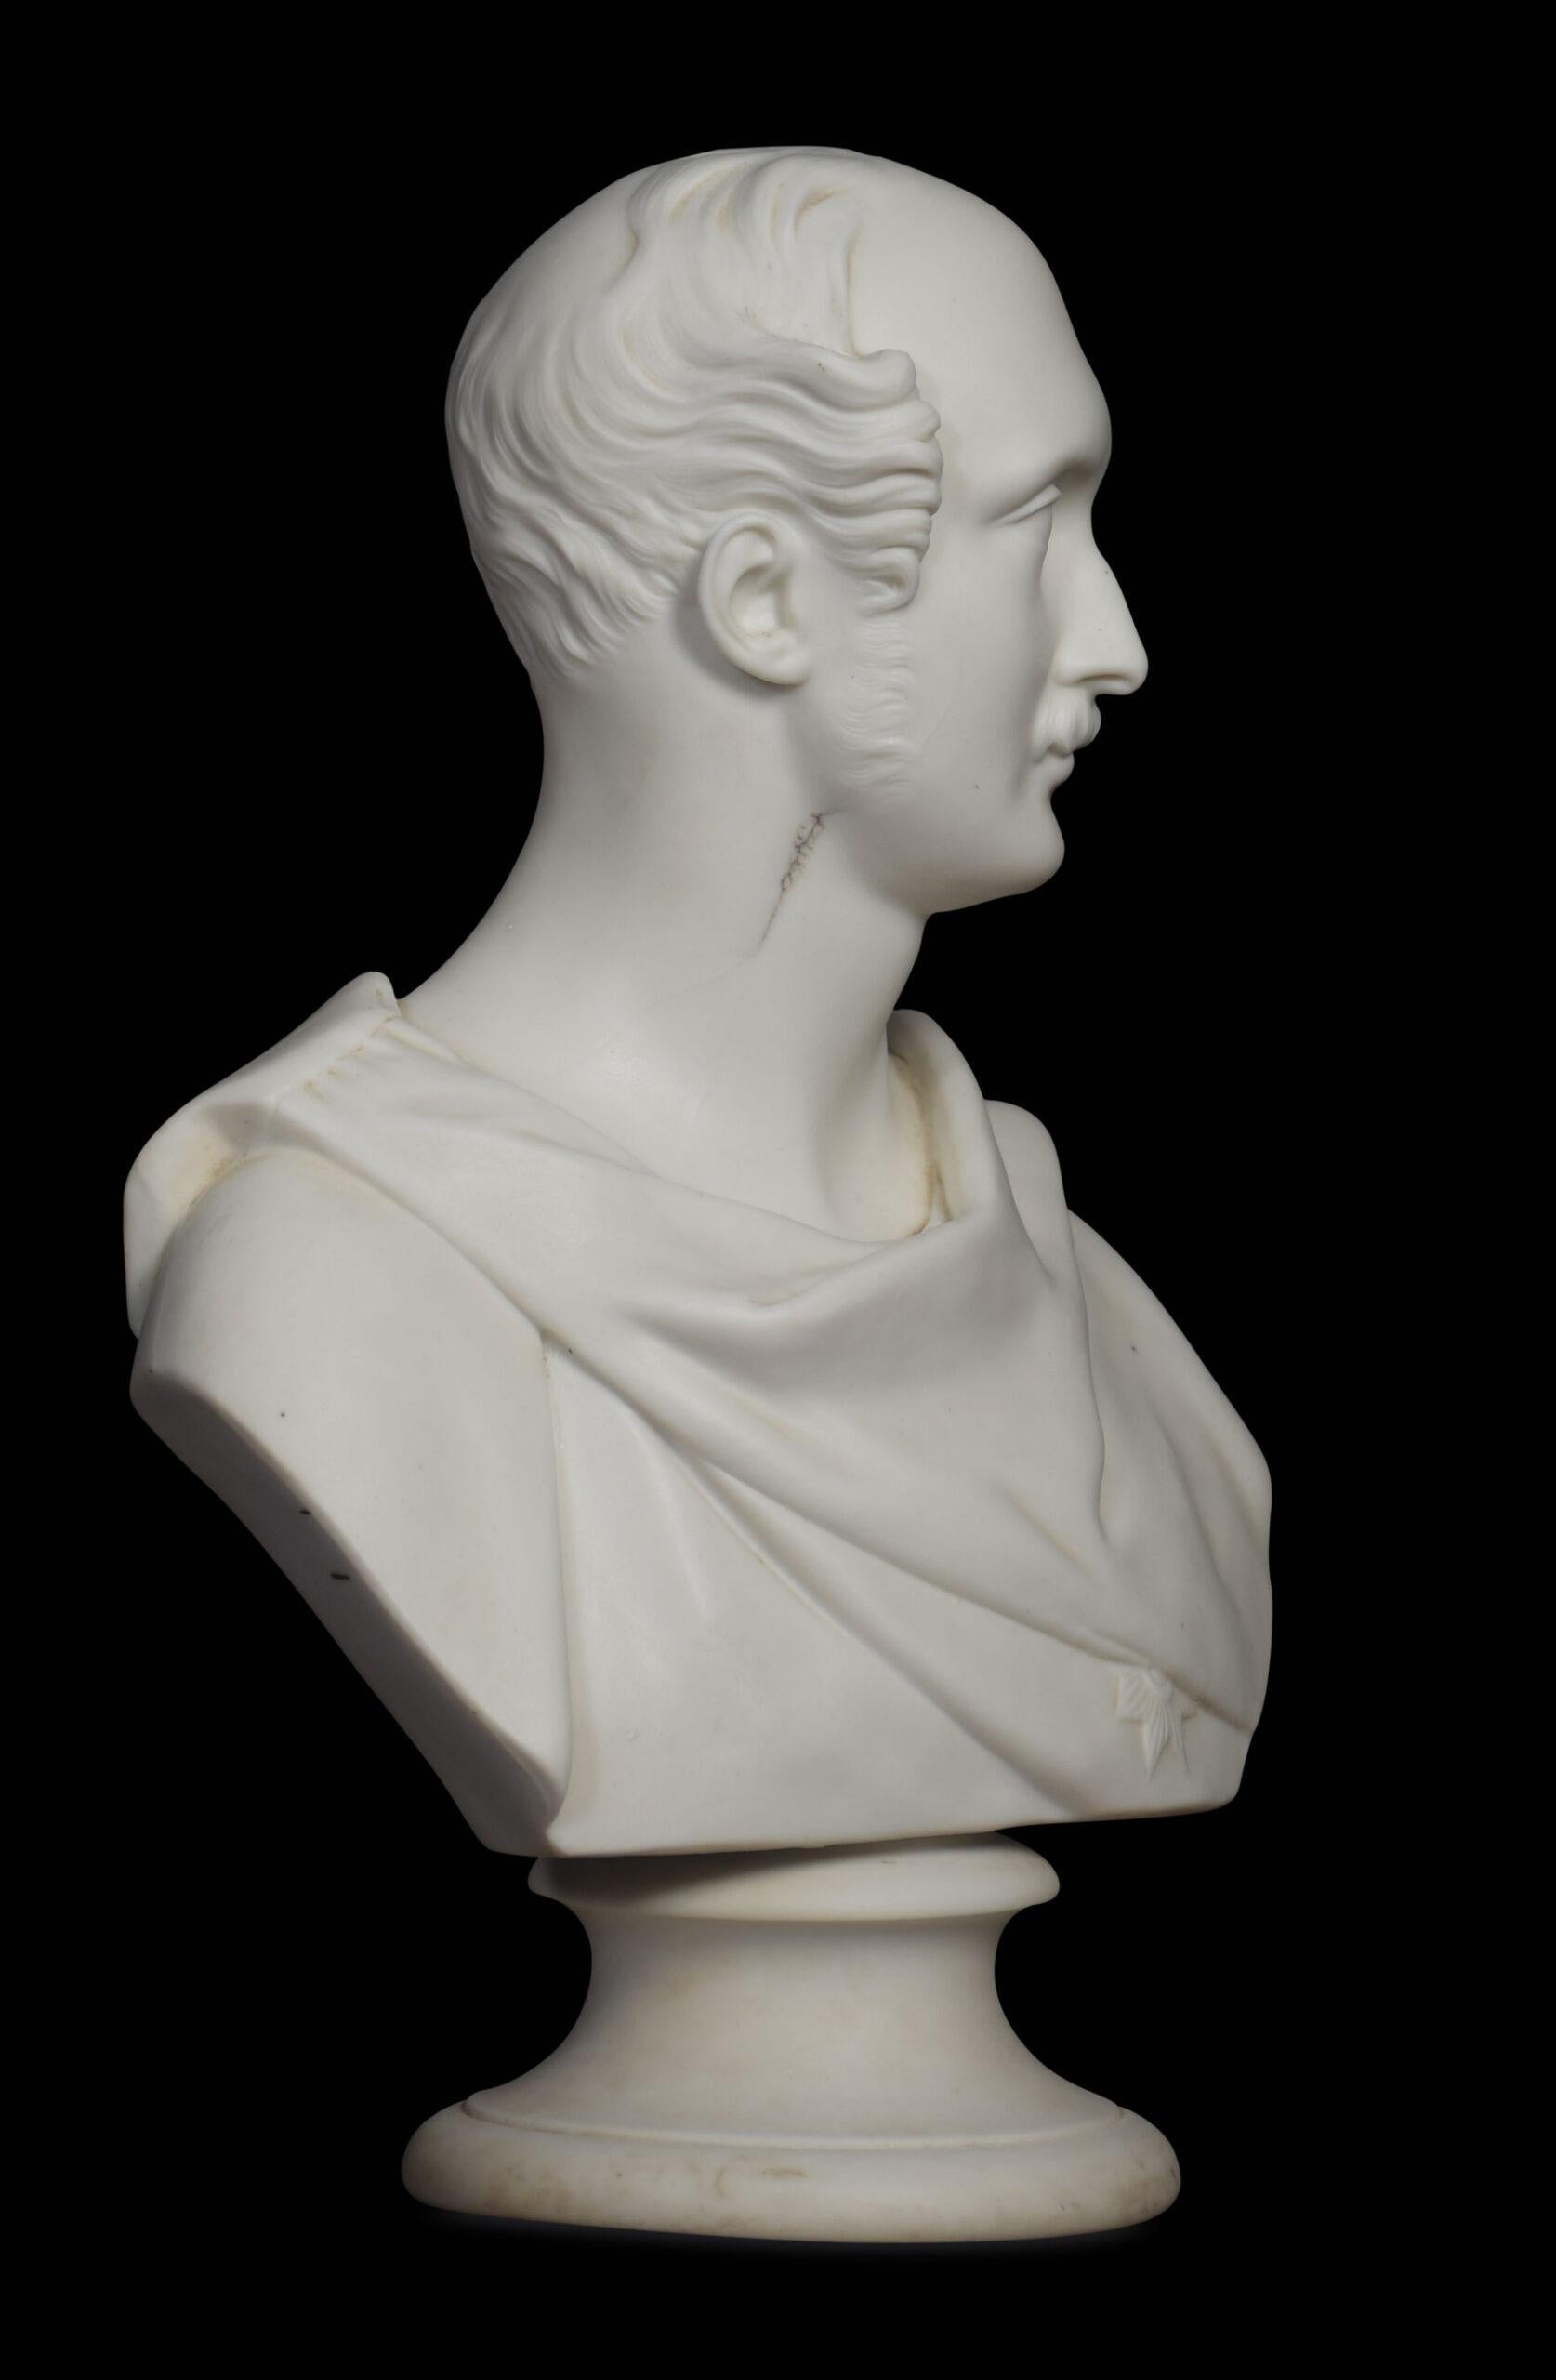 19th century Parian bust of Prince Albert, raised on a circular pedestal base.
Dimensions:
Height 14 inches
Width 10 inches
Depth 6 inches.